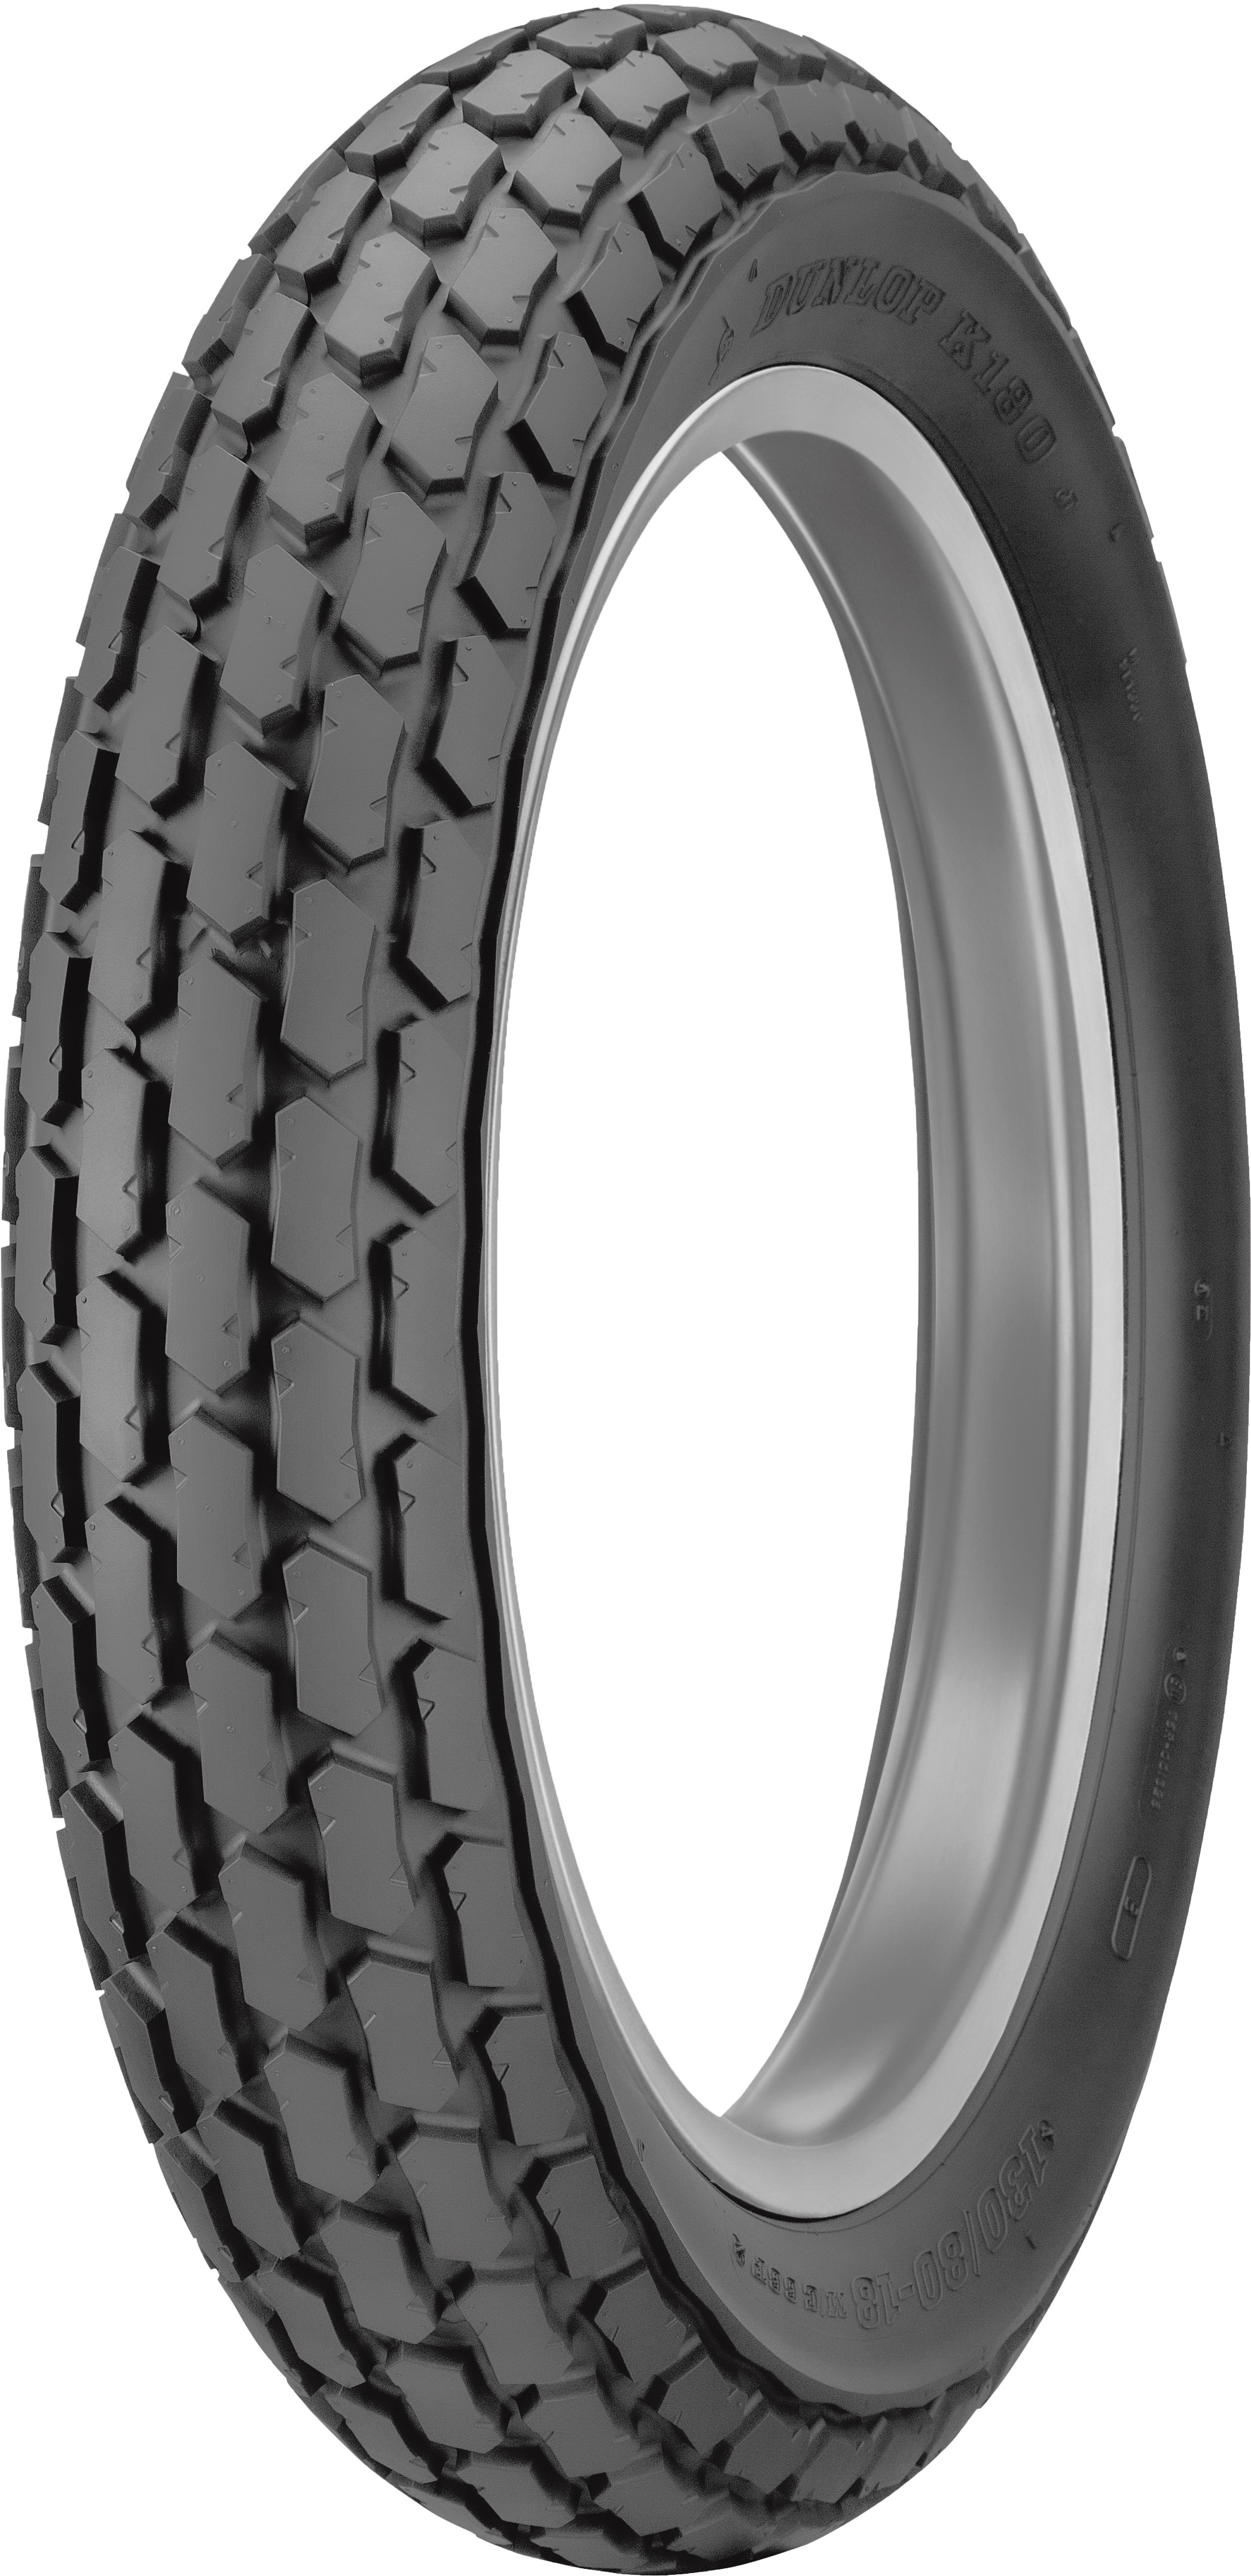 K180 Scooter Rear Tire 180/80-14 78P Bias TT - Click Image to Close